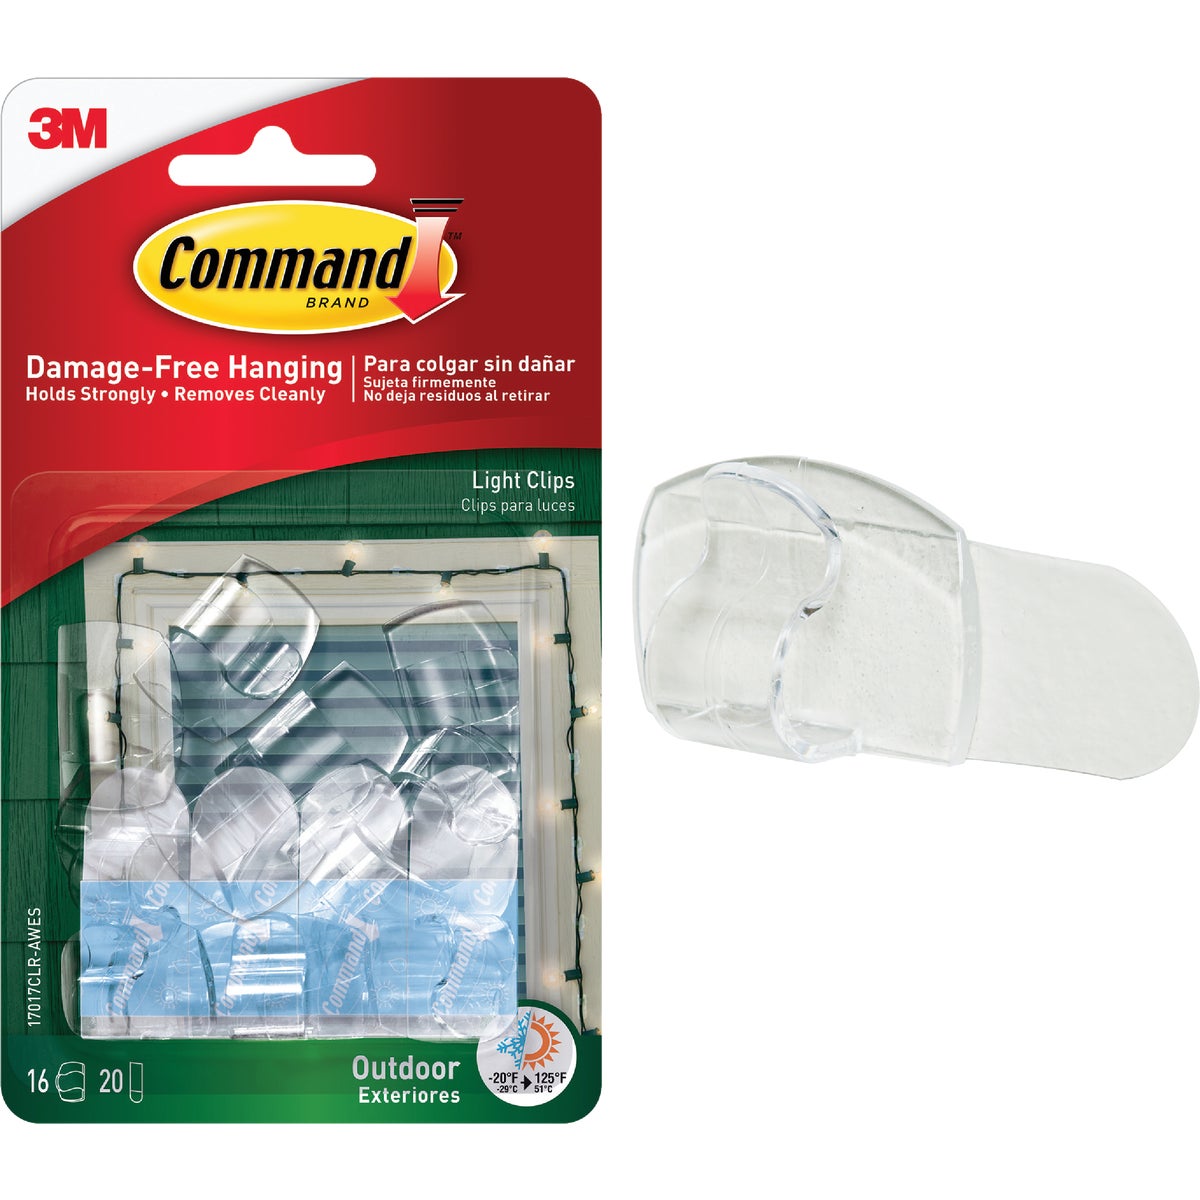 Item 242712, Warm up your exteriors, damage free, with Command Outdoor Light Clips by 3M